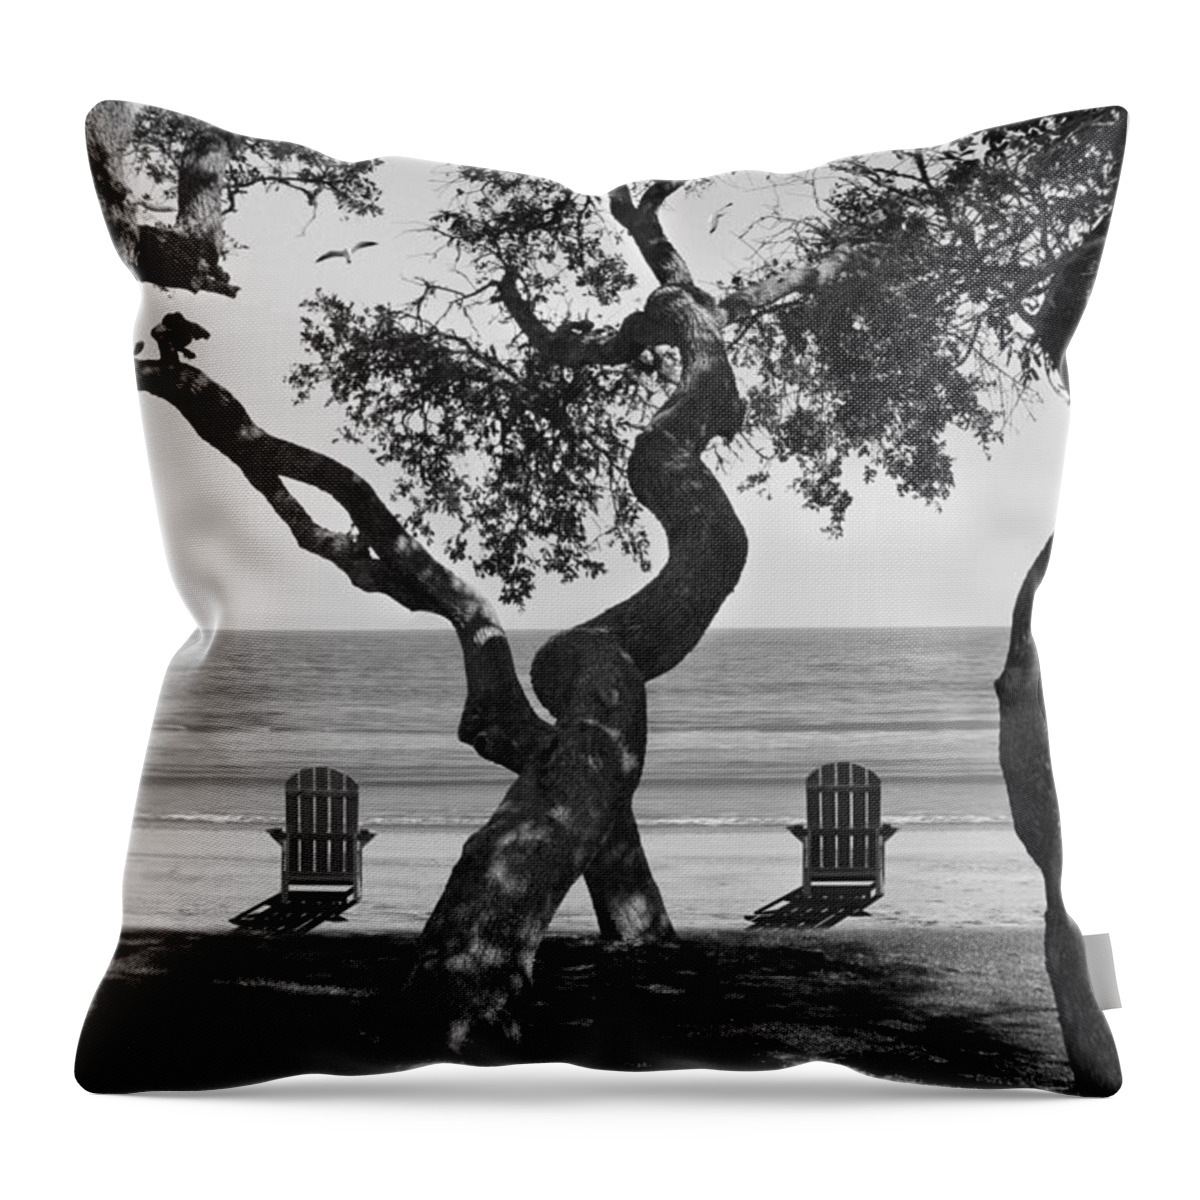 Seascape Throw Pillow featuring the photograph A Day At The Beach BW by Mike McGlothlen